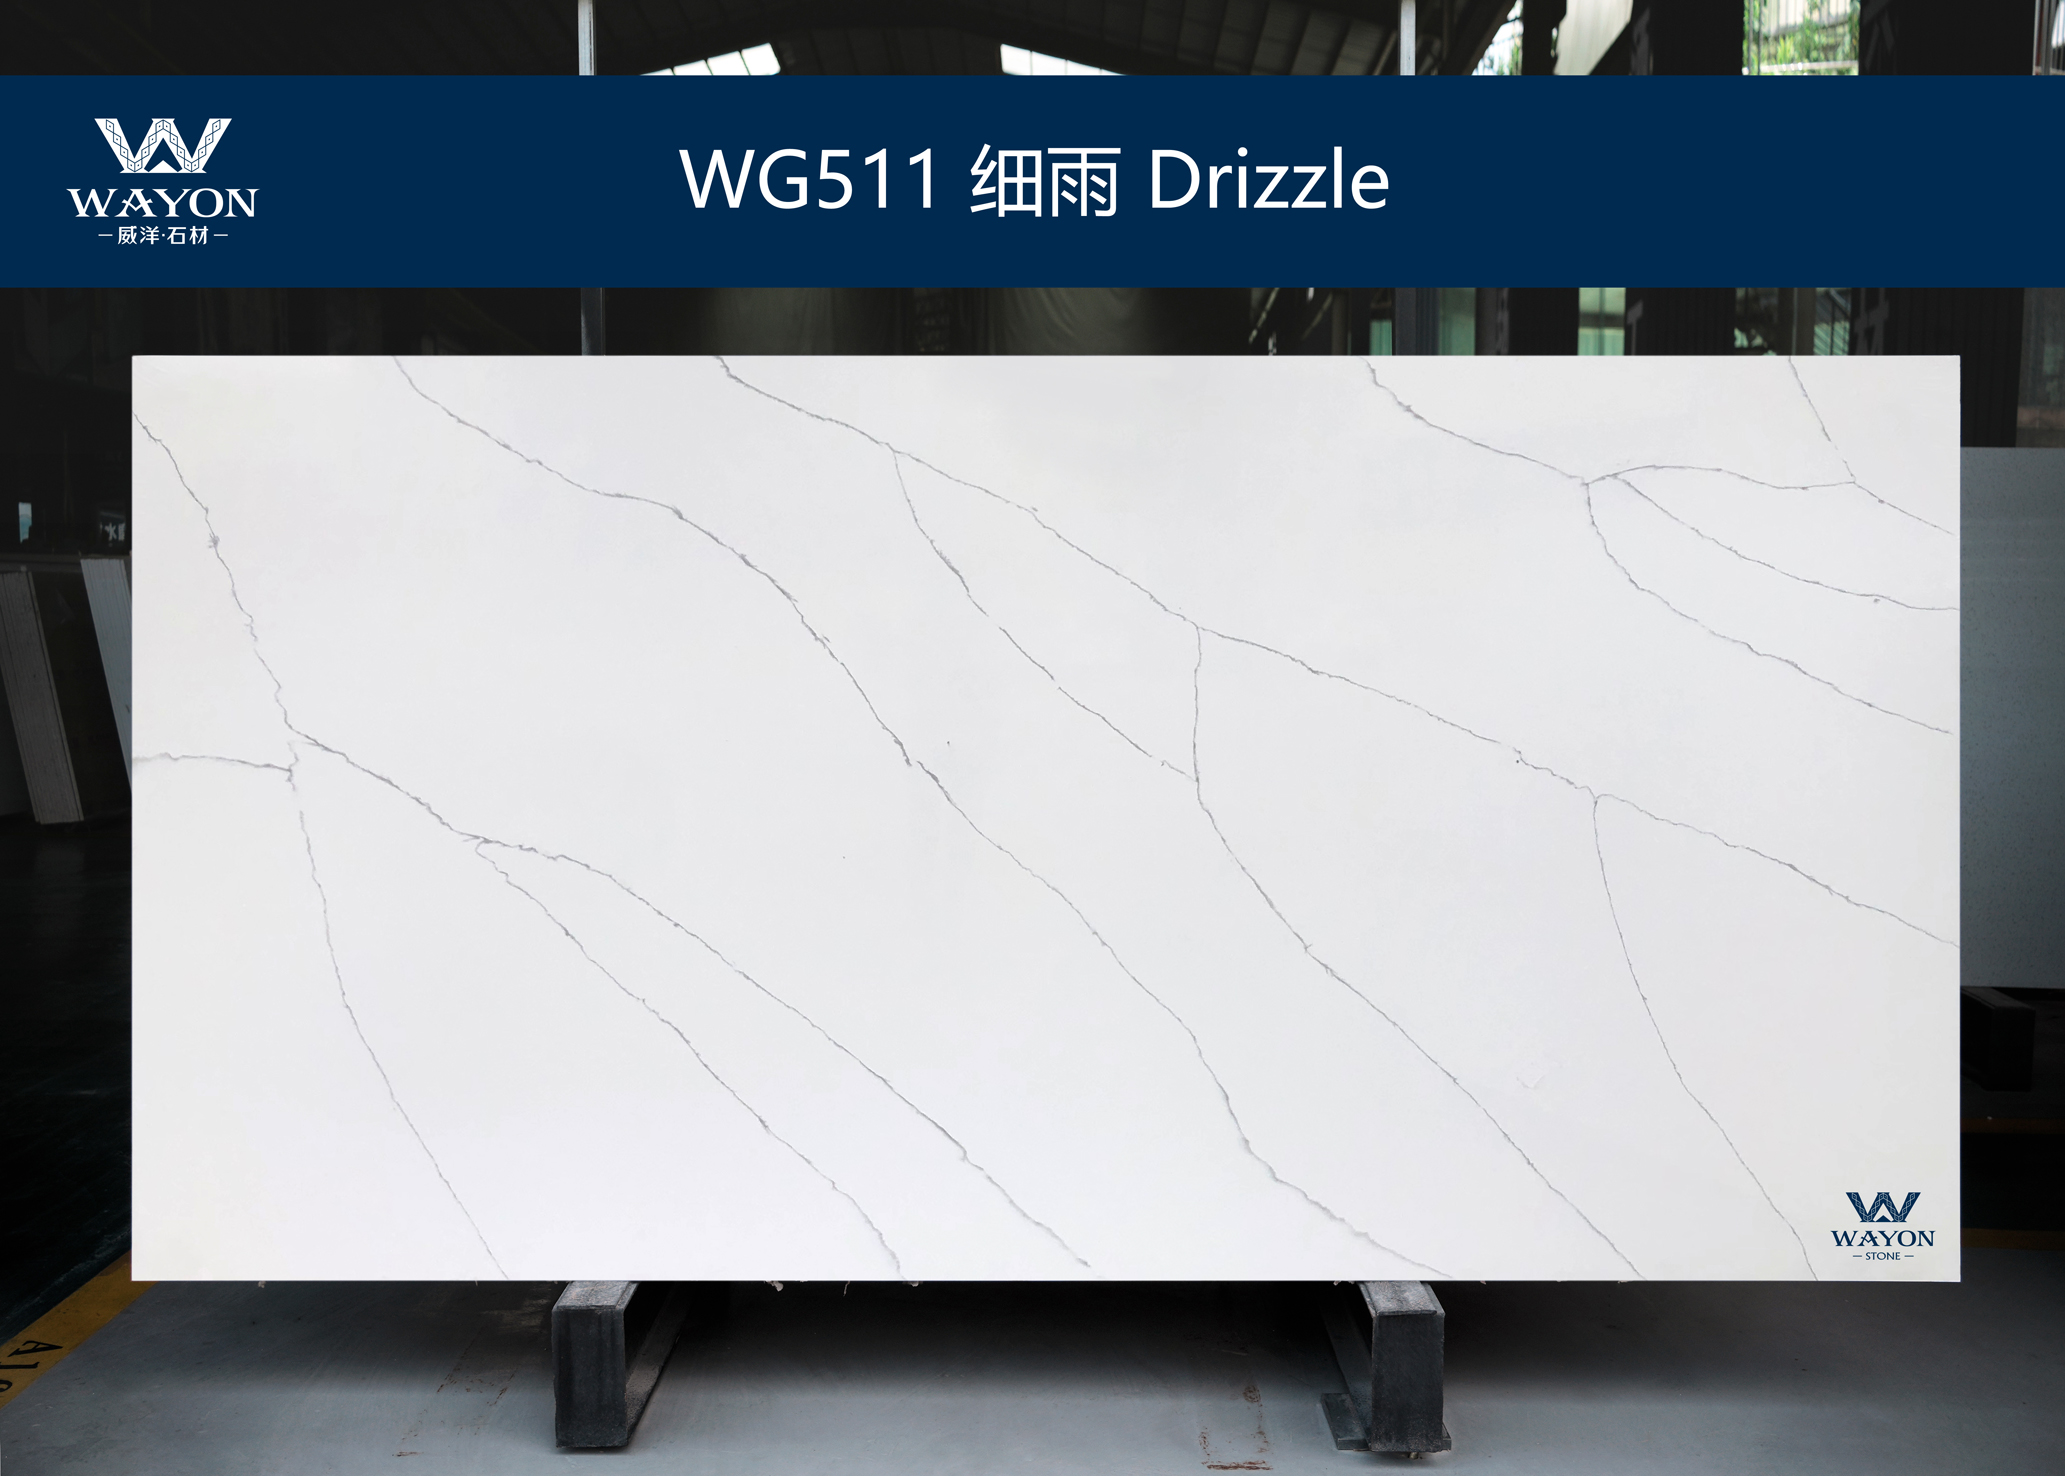 WG511 Drizzle